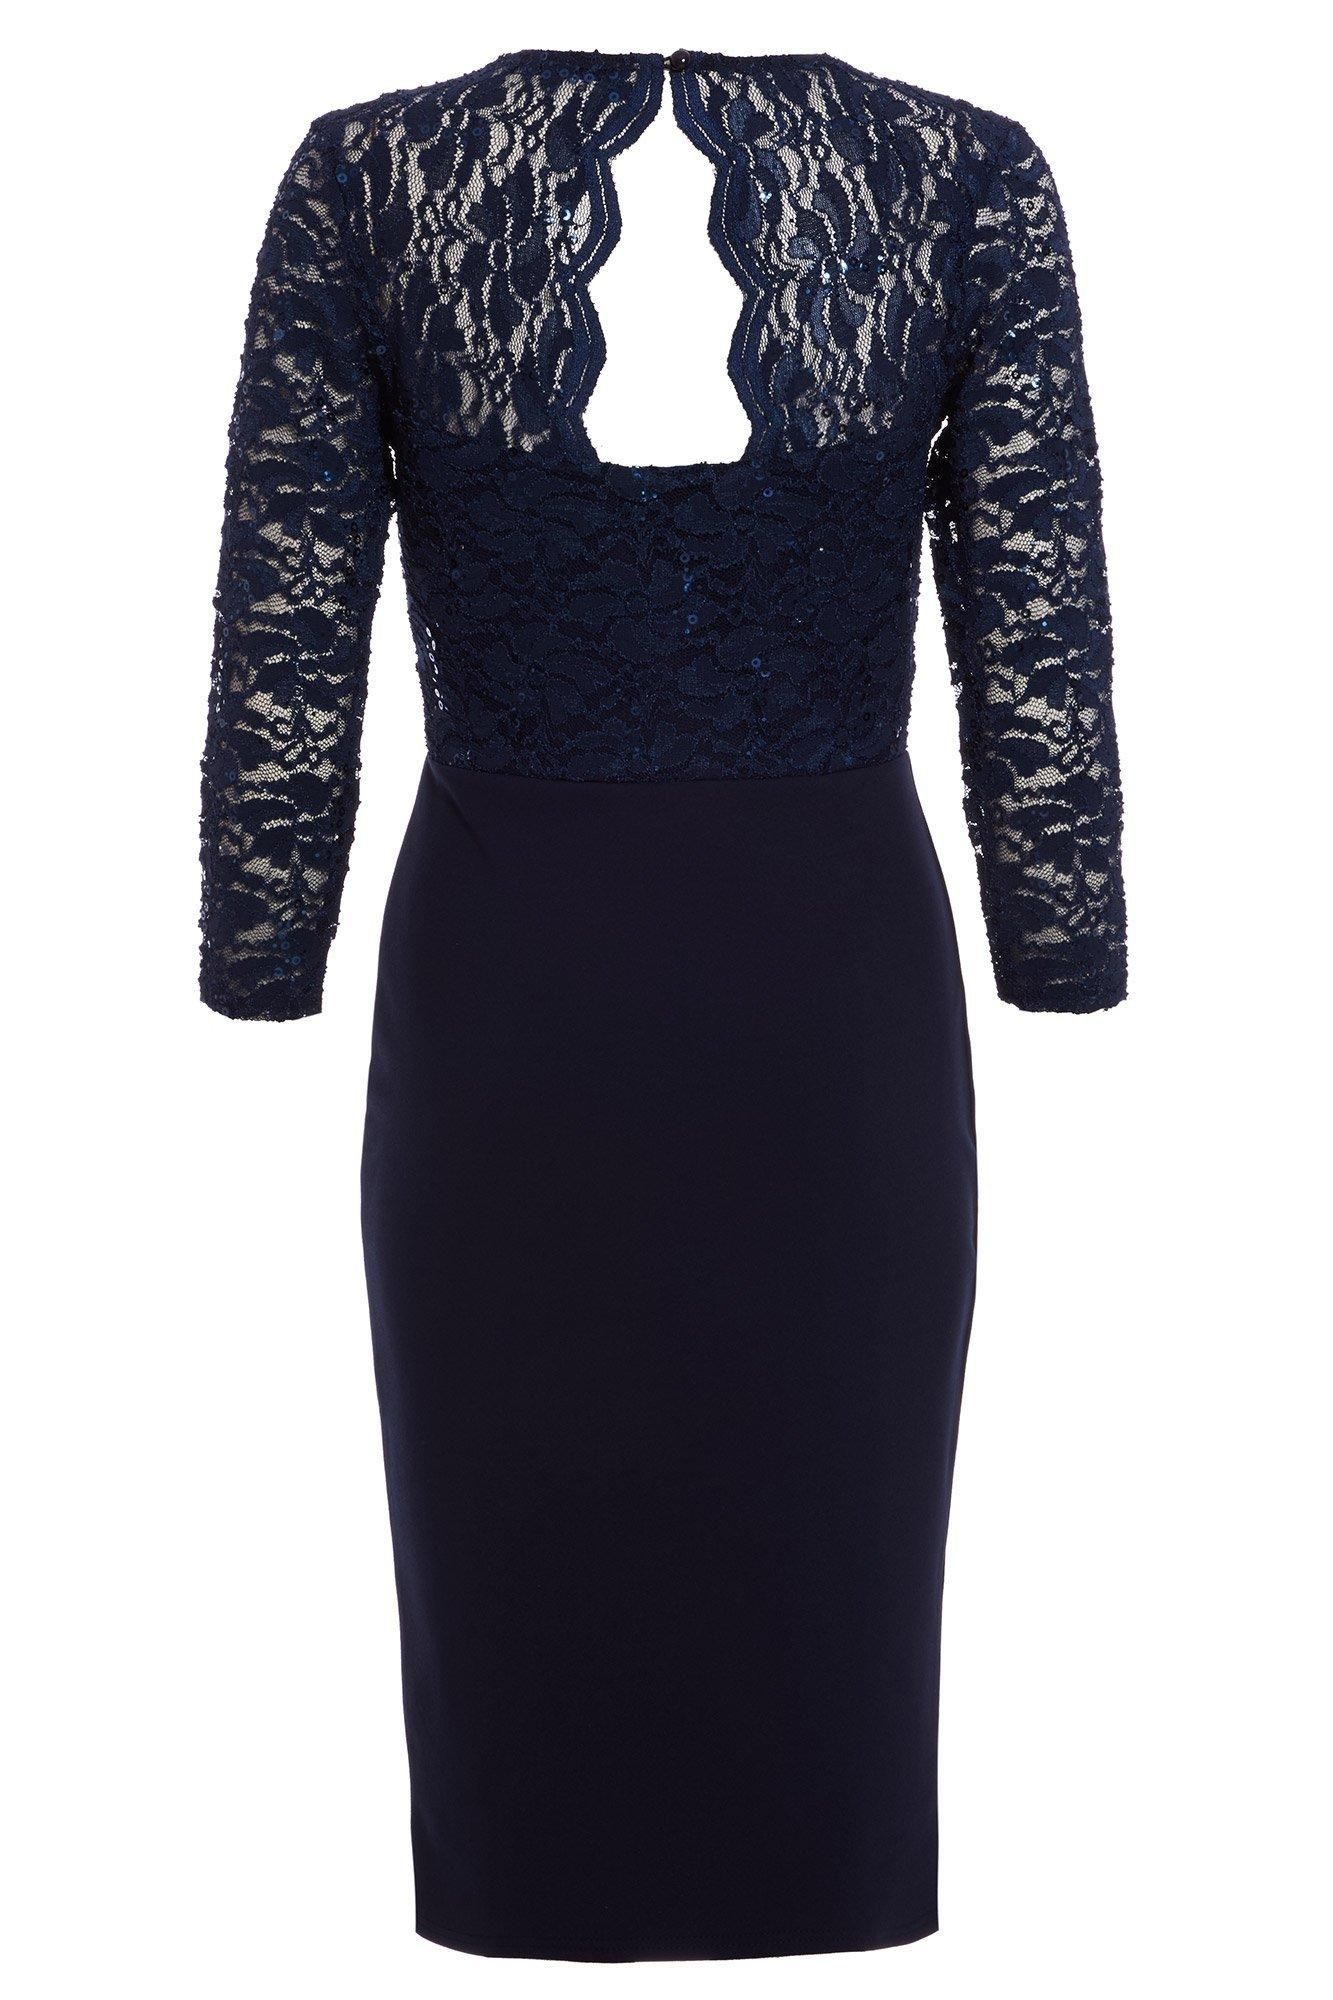 - Lace Midi  - Sequin finish  - Scallop edge  - Cutout detail   - Length: 92cm approx  - 92% polyester, 8% nylon   - Model height: 5' 9